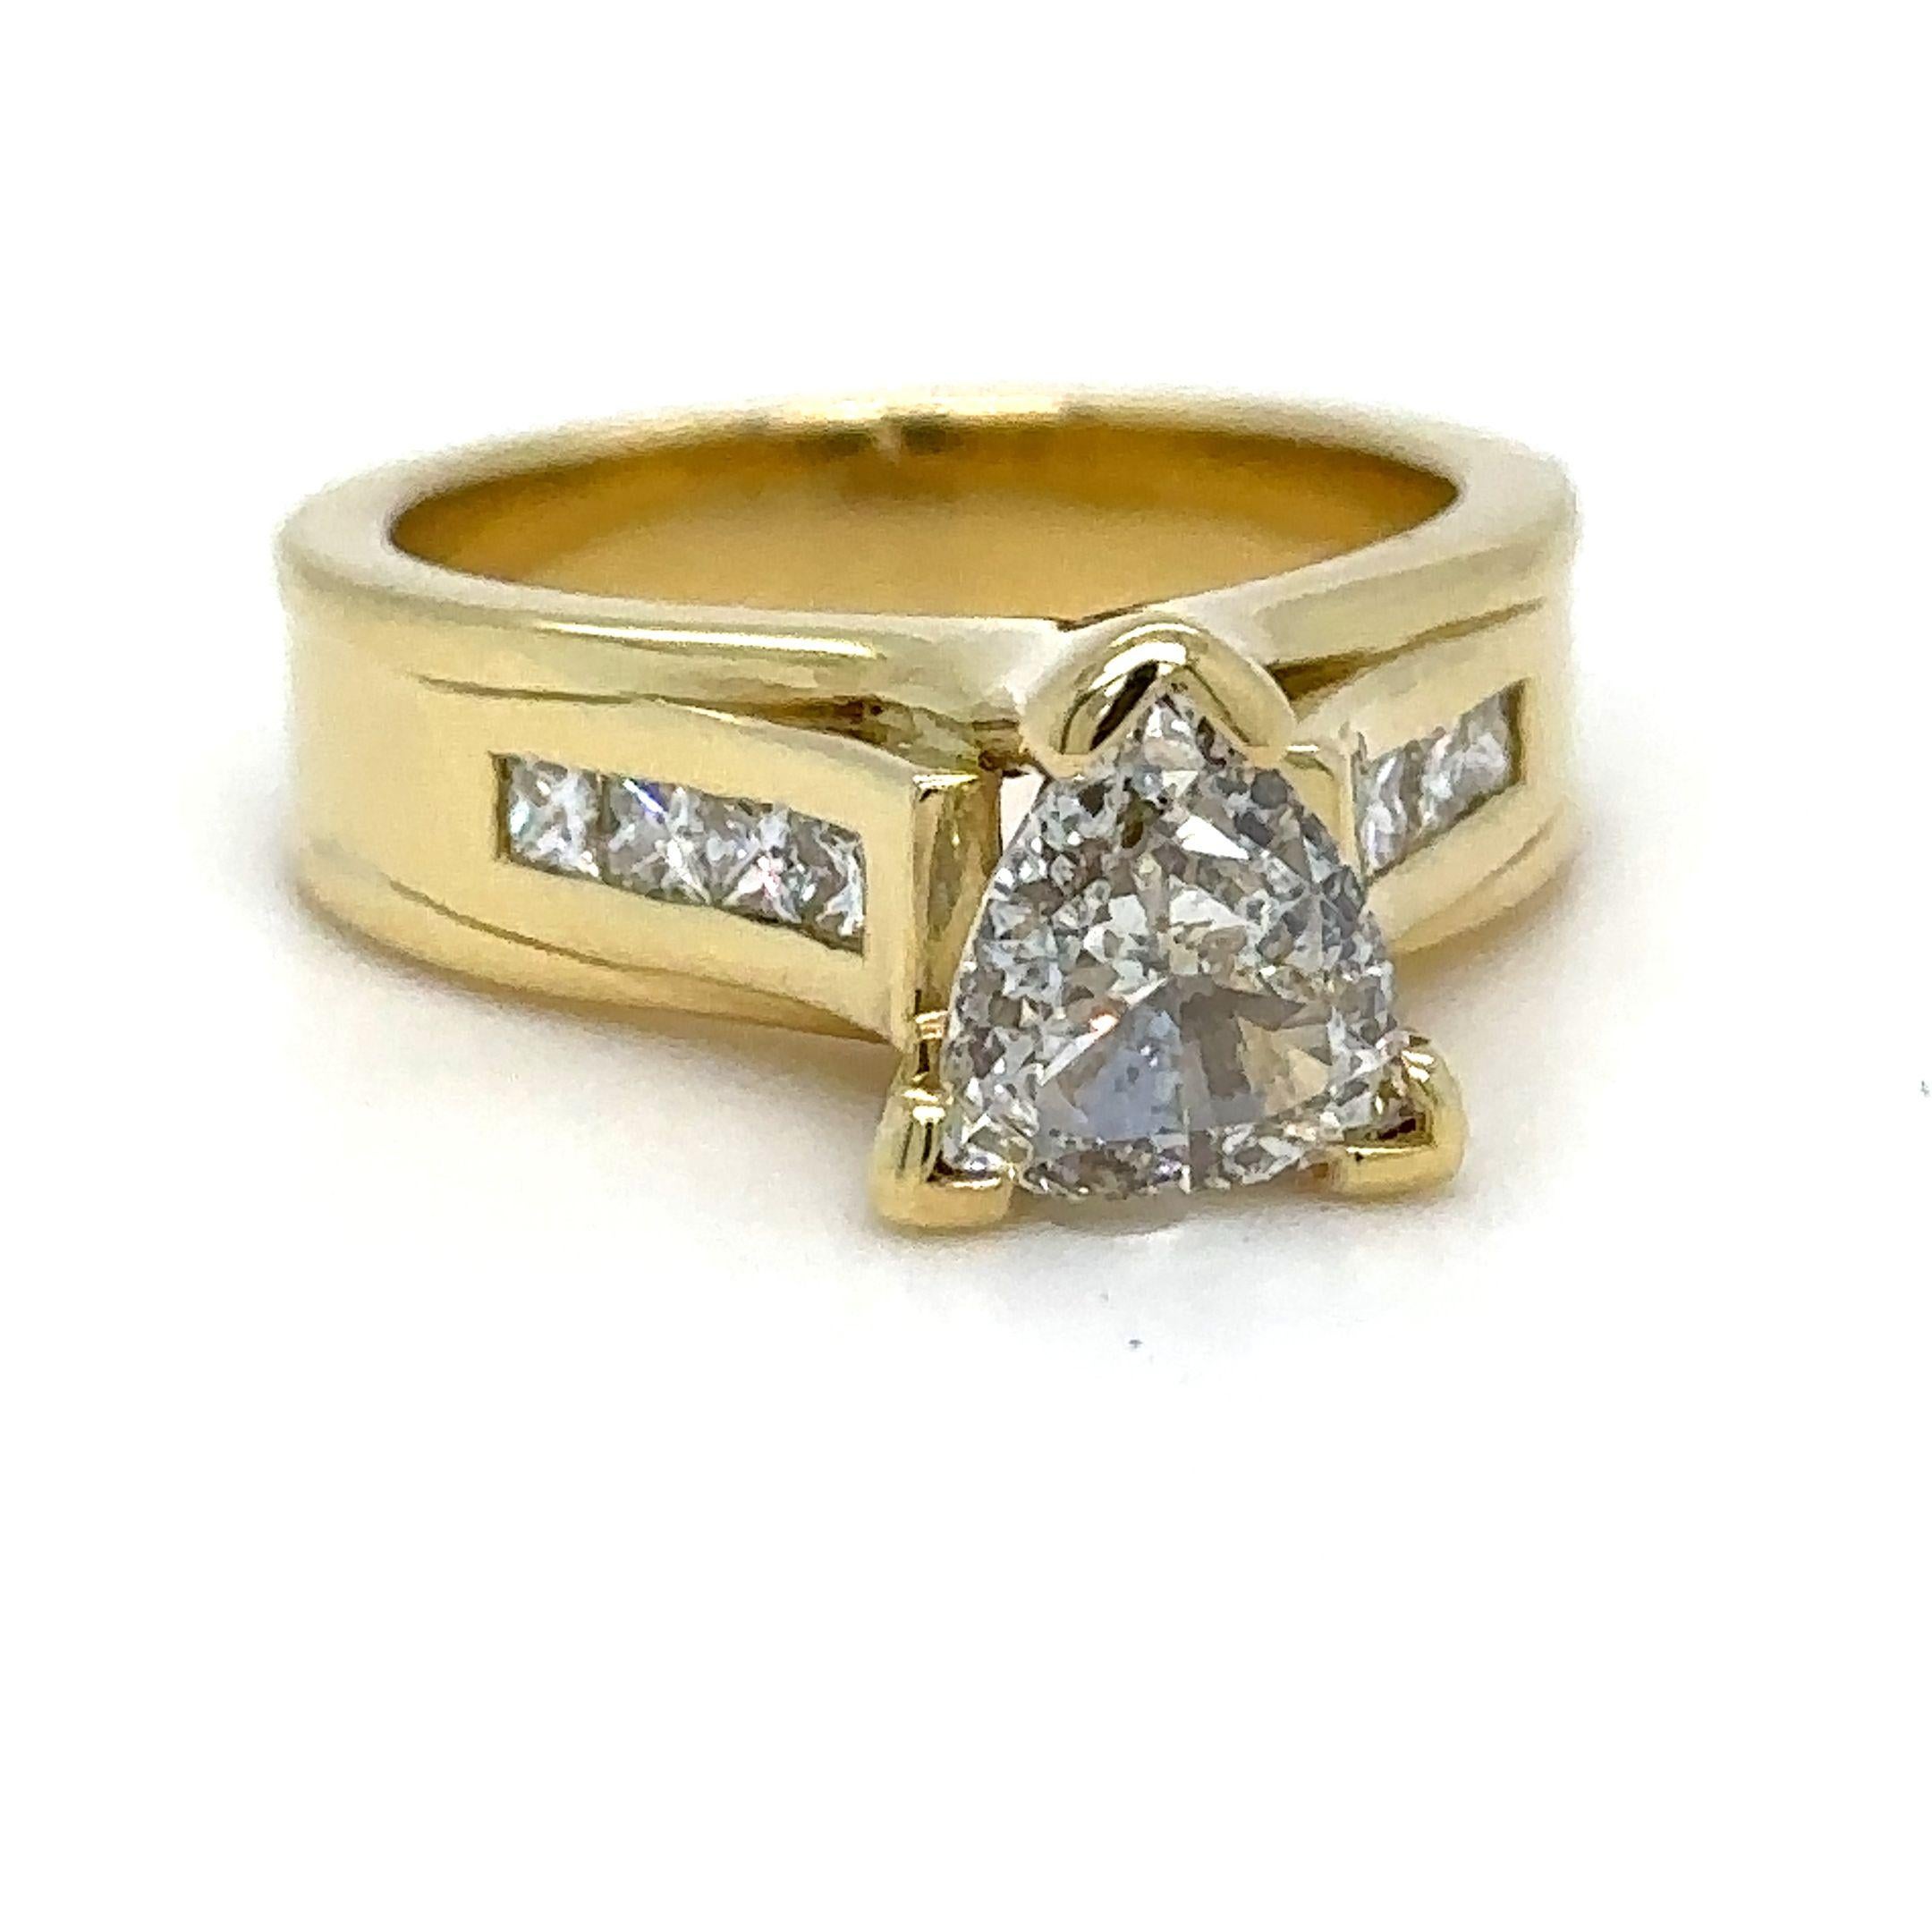 A Diamond engagement Ring, made of 18ct Yellow Gold, and ring size of M, and weighing 10gm. Stamped: 750.

Set with a Single Triangle, brilliant cut Diamond, colour G, and clarity SI1. Weighing 1.00 ct. Certificate provided from GIA. With Report